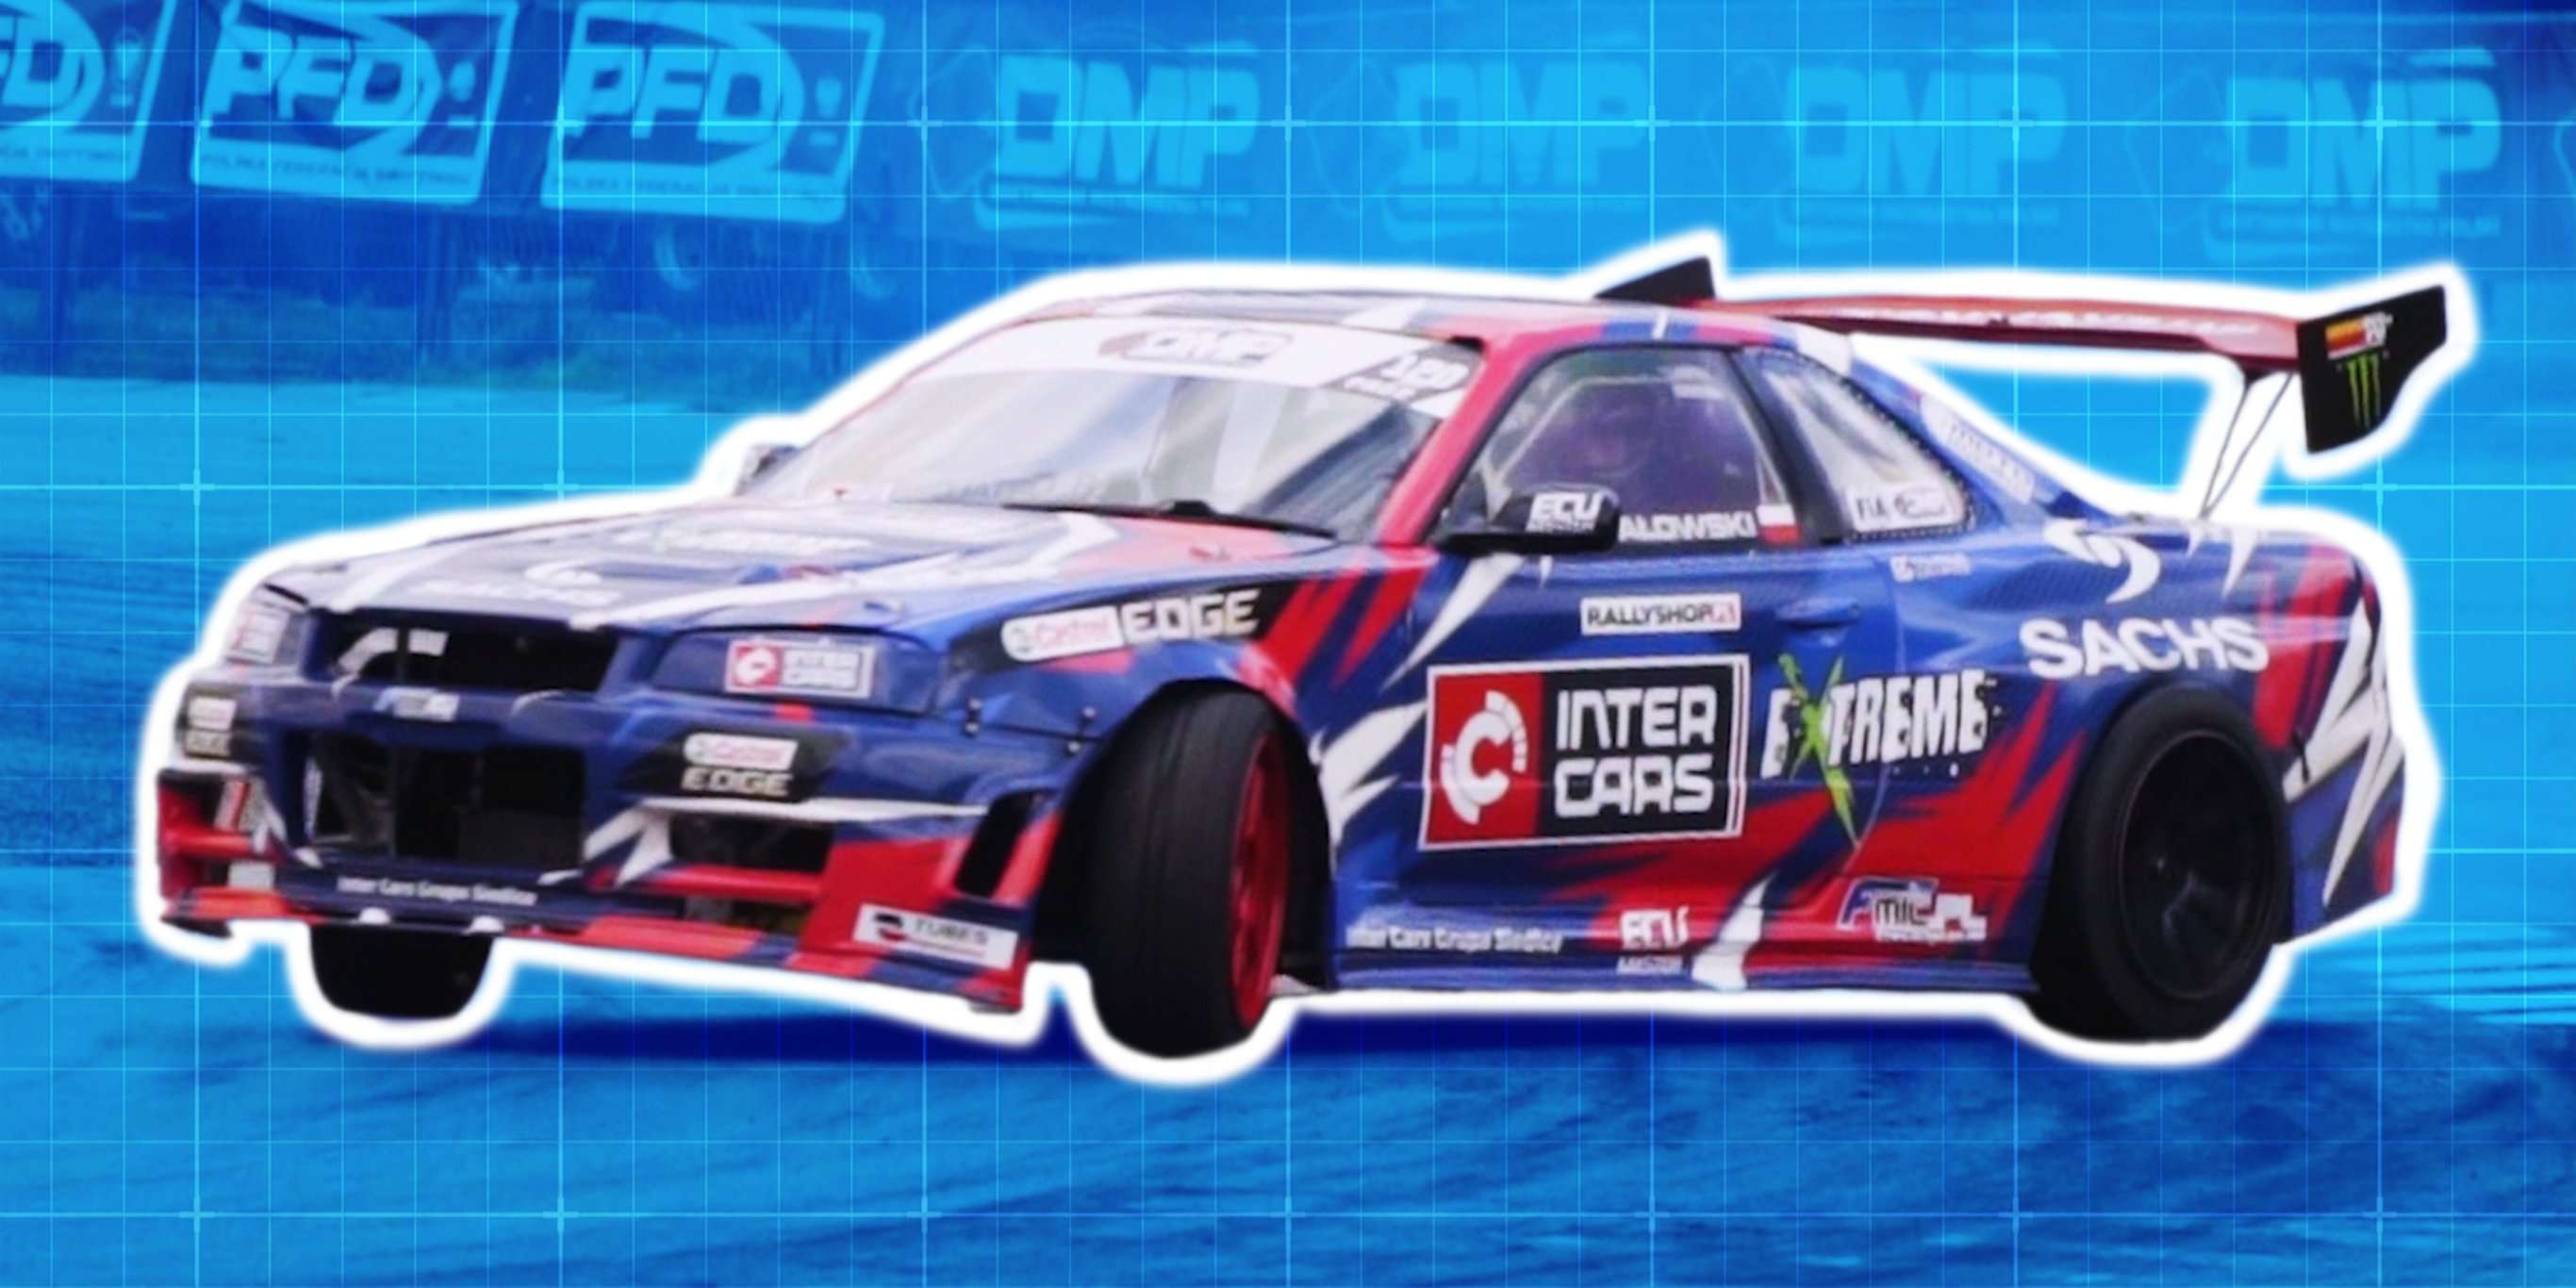 Taboola Ad Example 53013 - A Professional Drifter Explains The Physics Behind Drifting